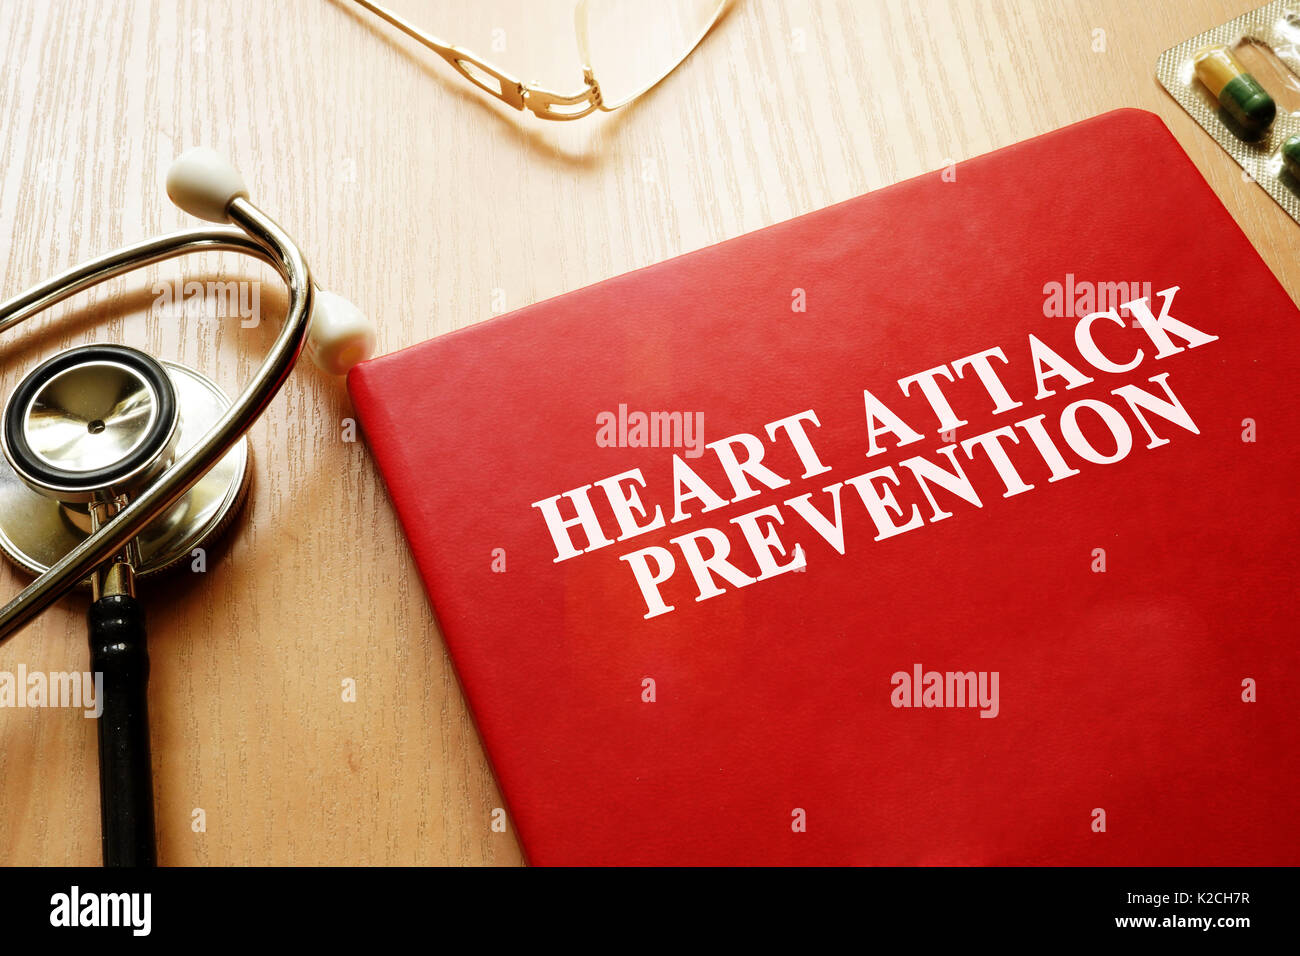 Heart Attack Prevention book on a table. Stock Photo